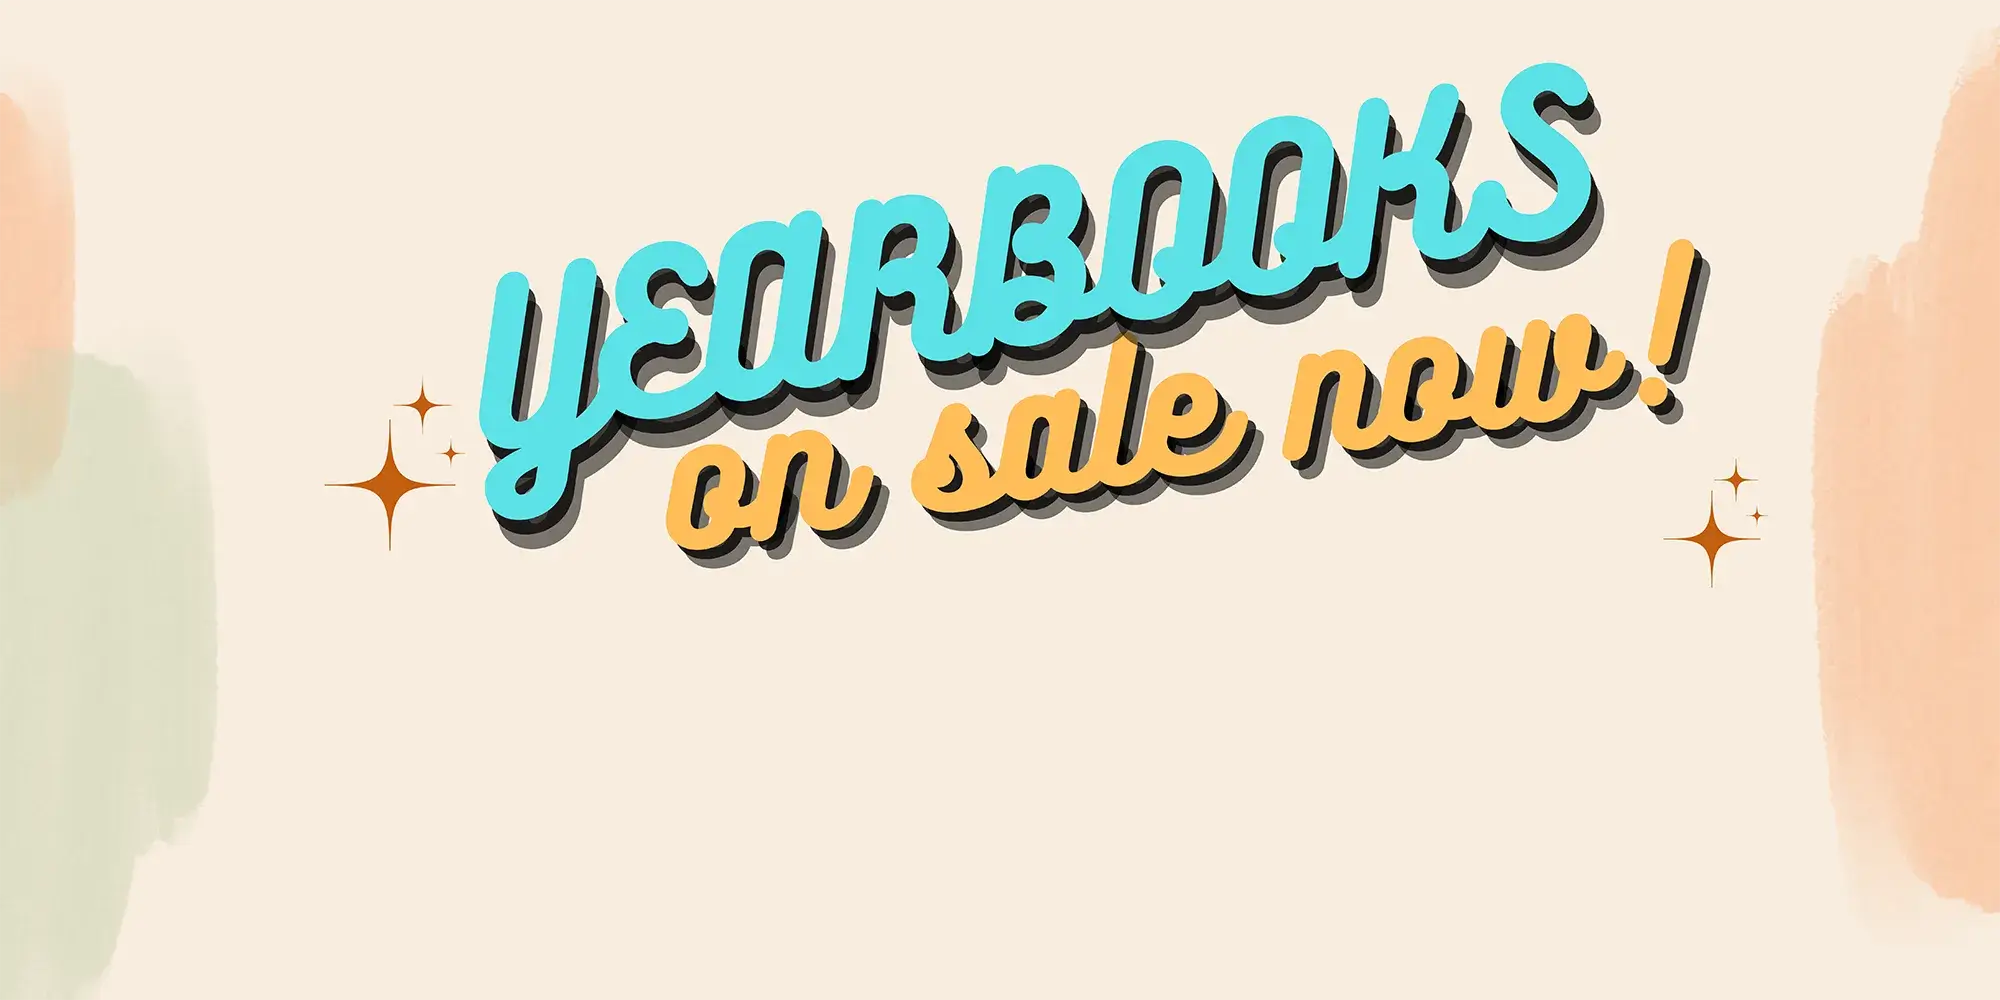 Yearbooks on sale now